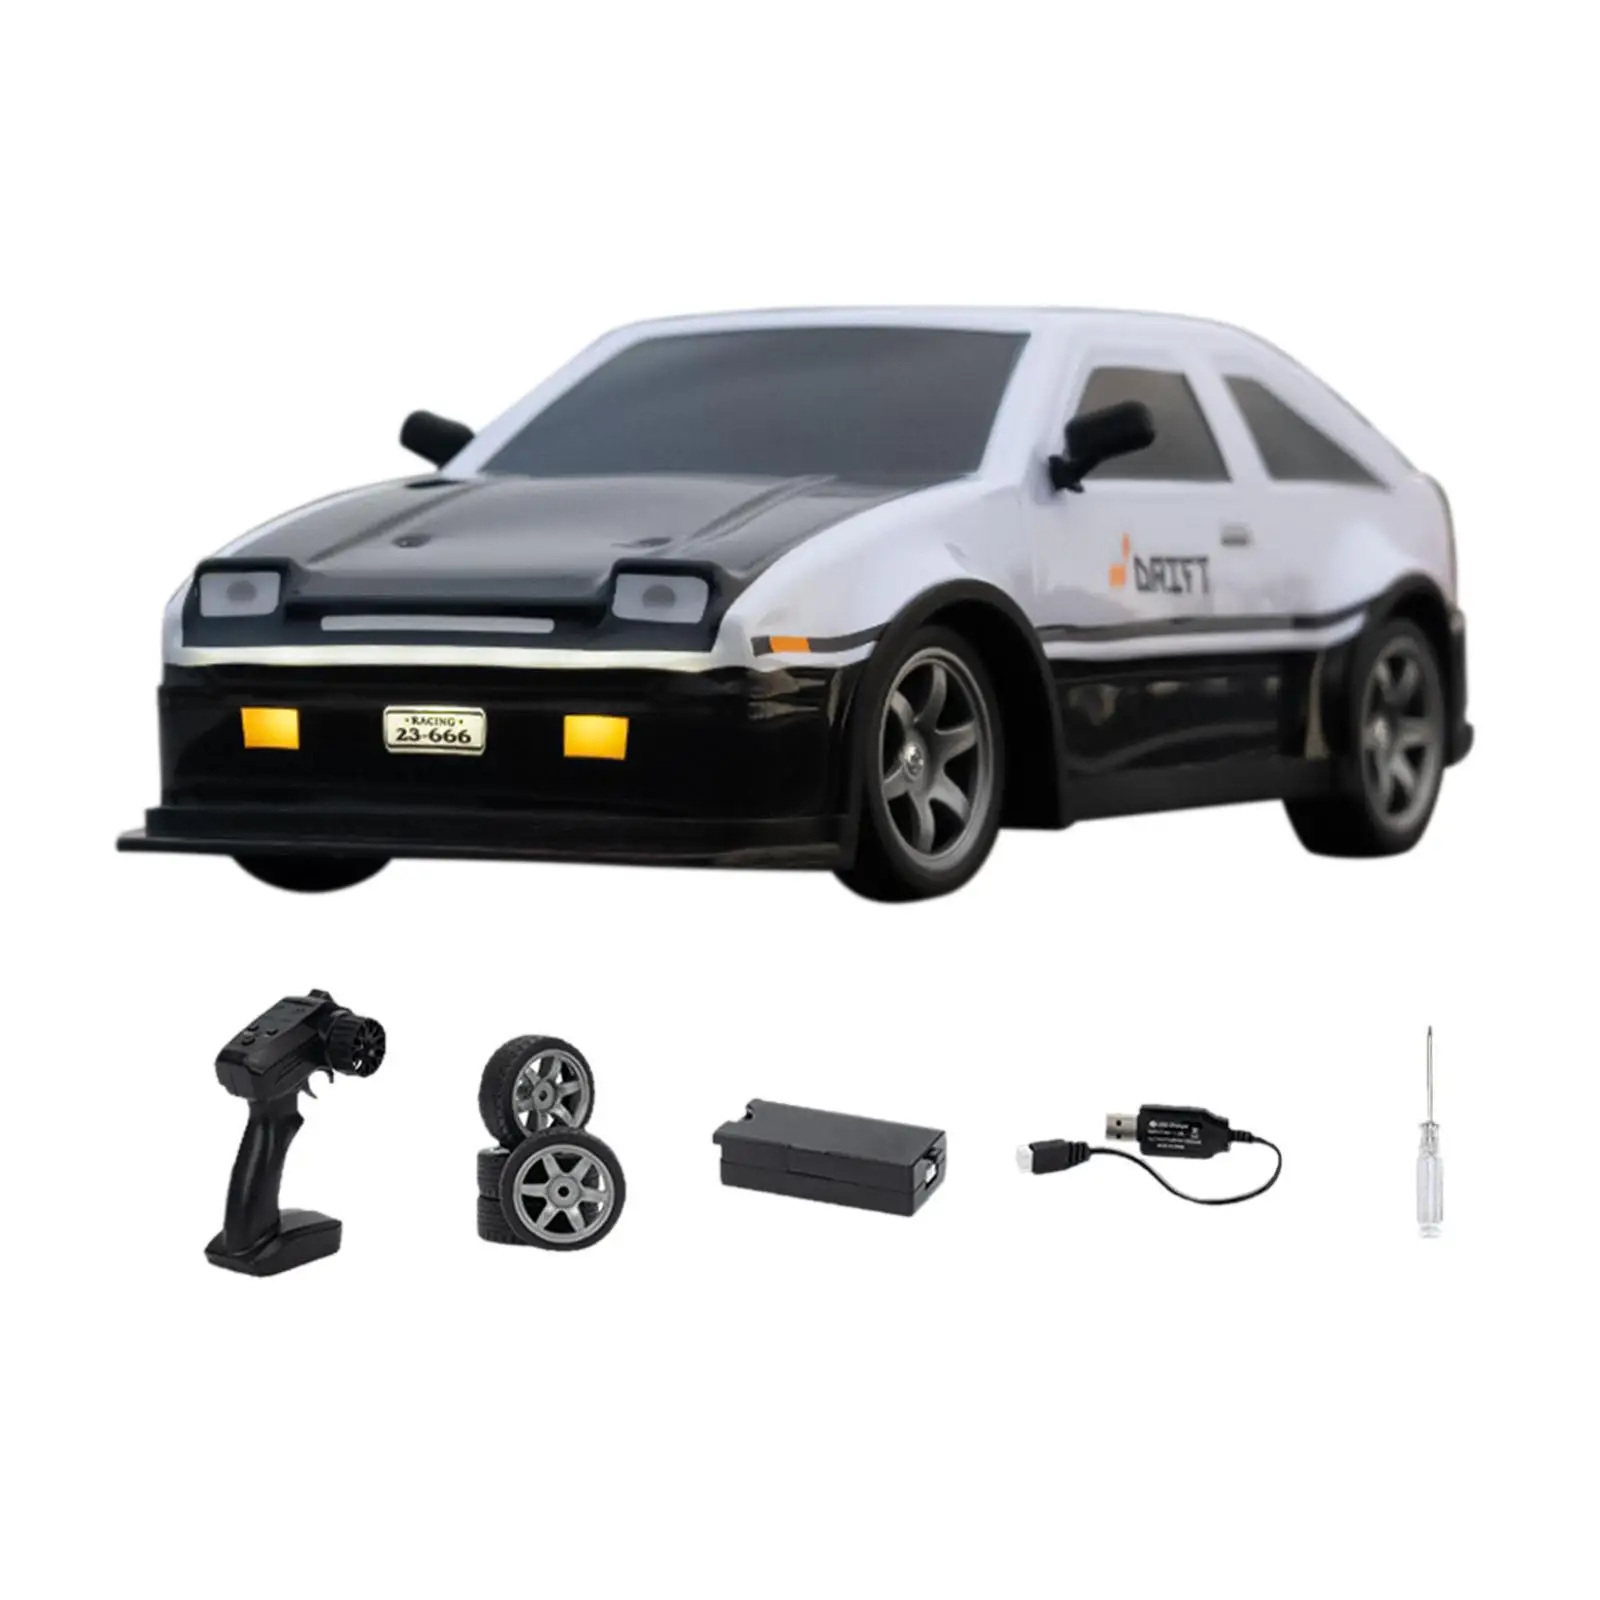 1/16 RC Drift Car Rechargeable 4WD 60M Remote 2 Speed Switch Remote Control Car for Party Favors Festivals New Year Holiday Gift